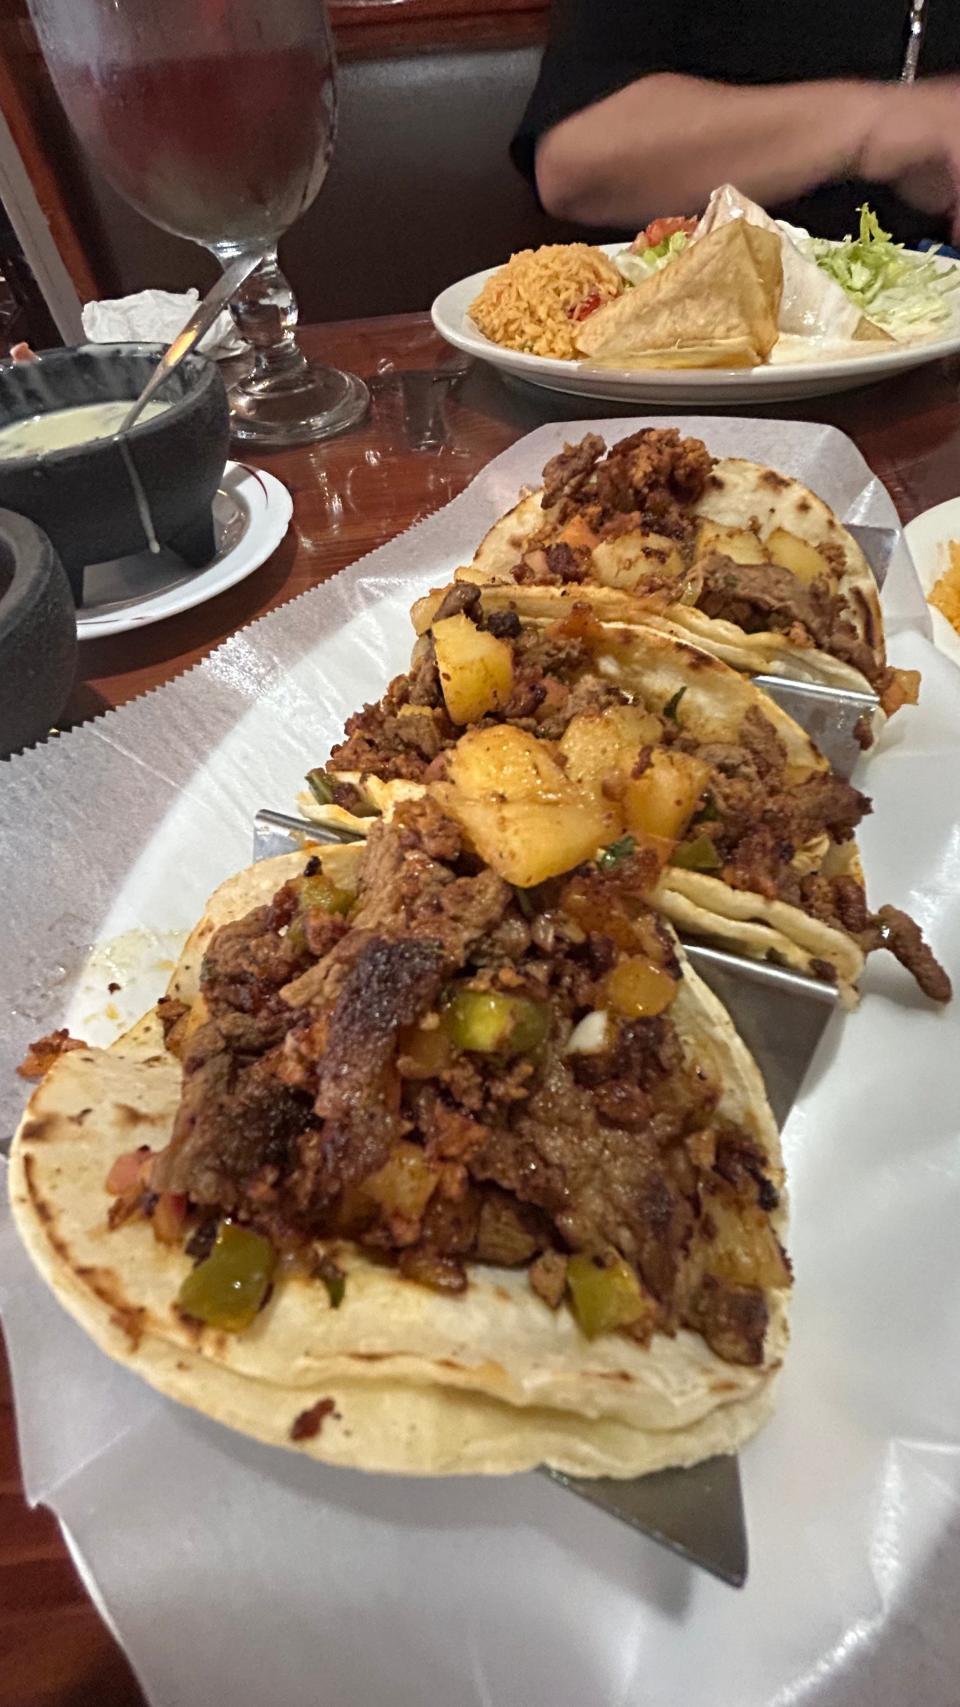 Mexican street tacos with steak, pineapple, chorizo, pico de gallo and potatoes on a corn tortilla are one of 12 street taco options at Tito's.